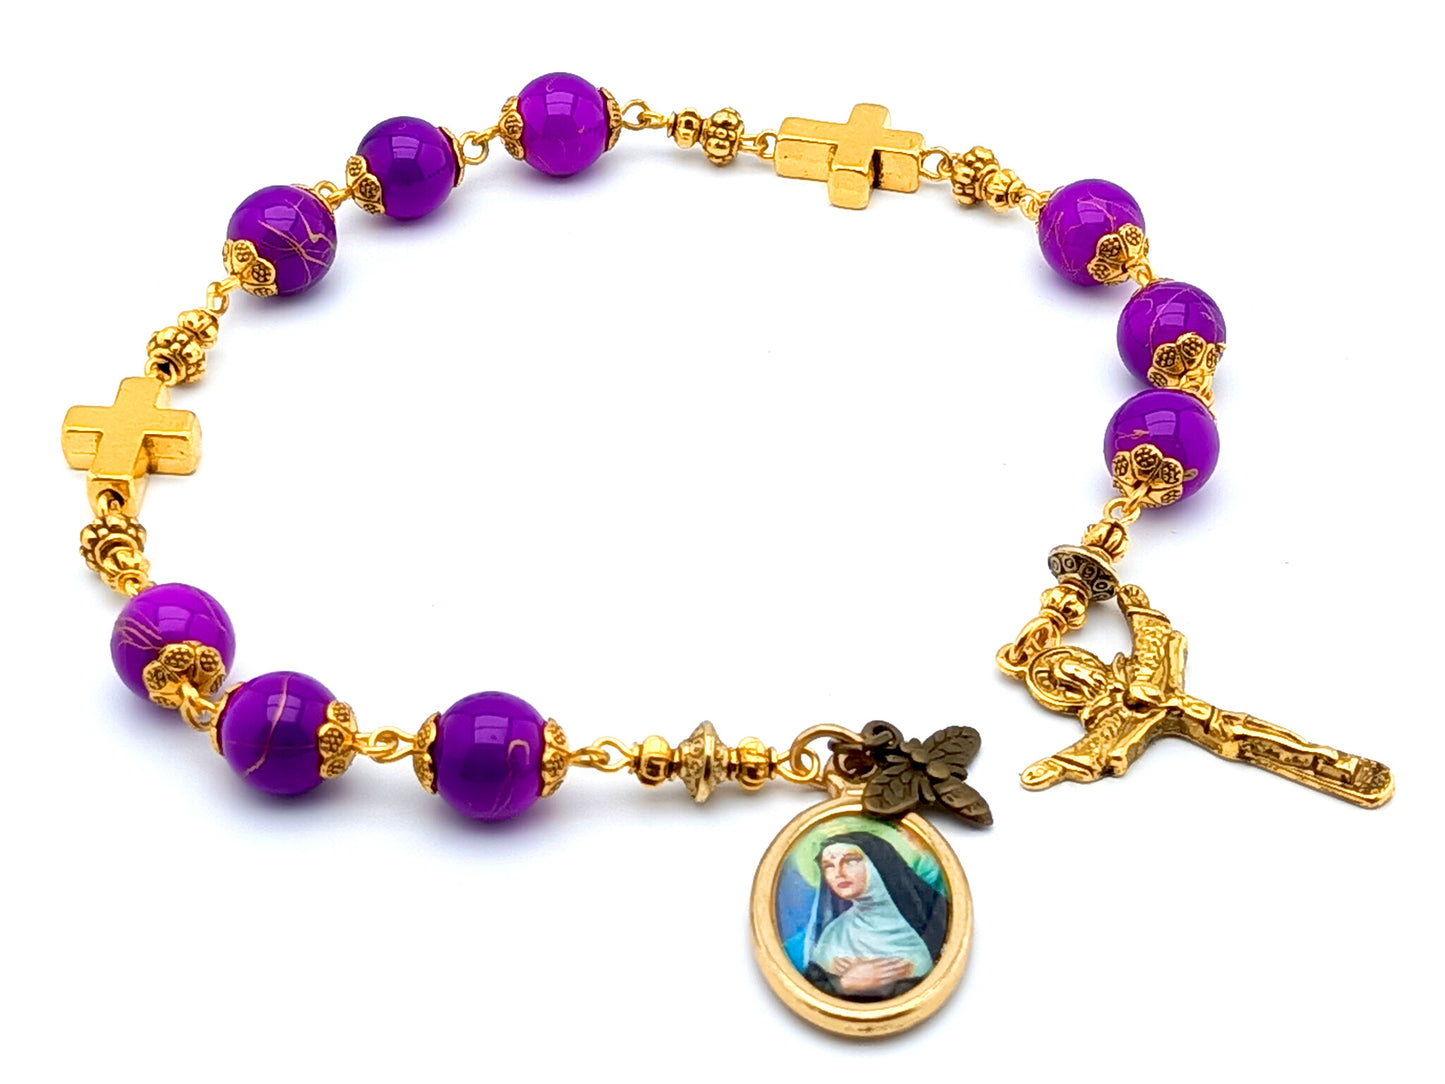 Saint Rita unique rosary beads prayer chaplet with marbled purple glass and golden cross beads, golden crucifix and picture centre medal.